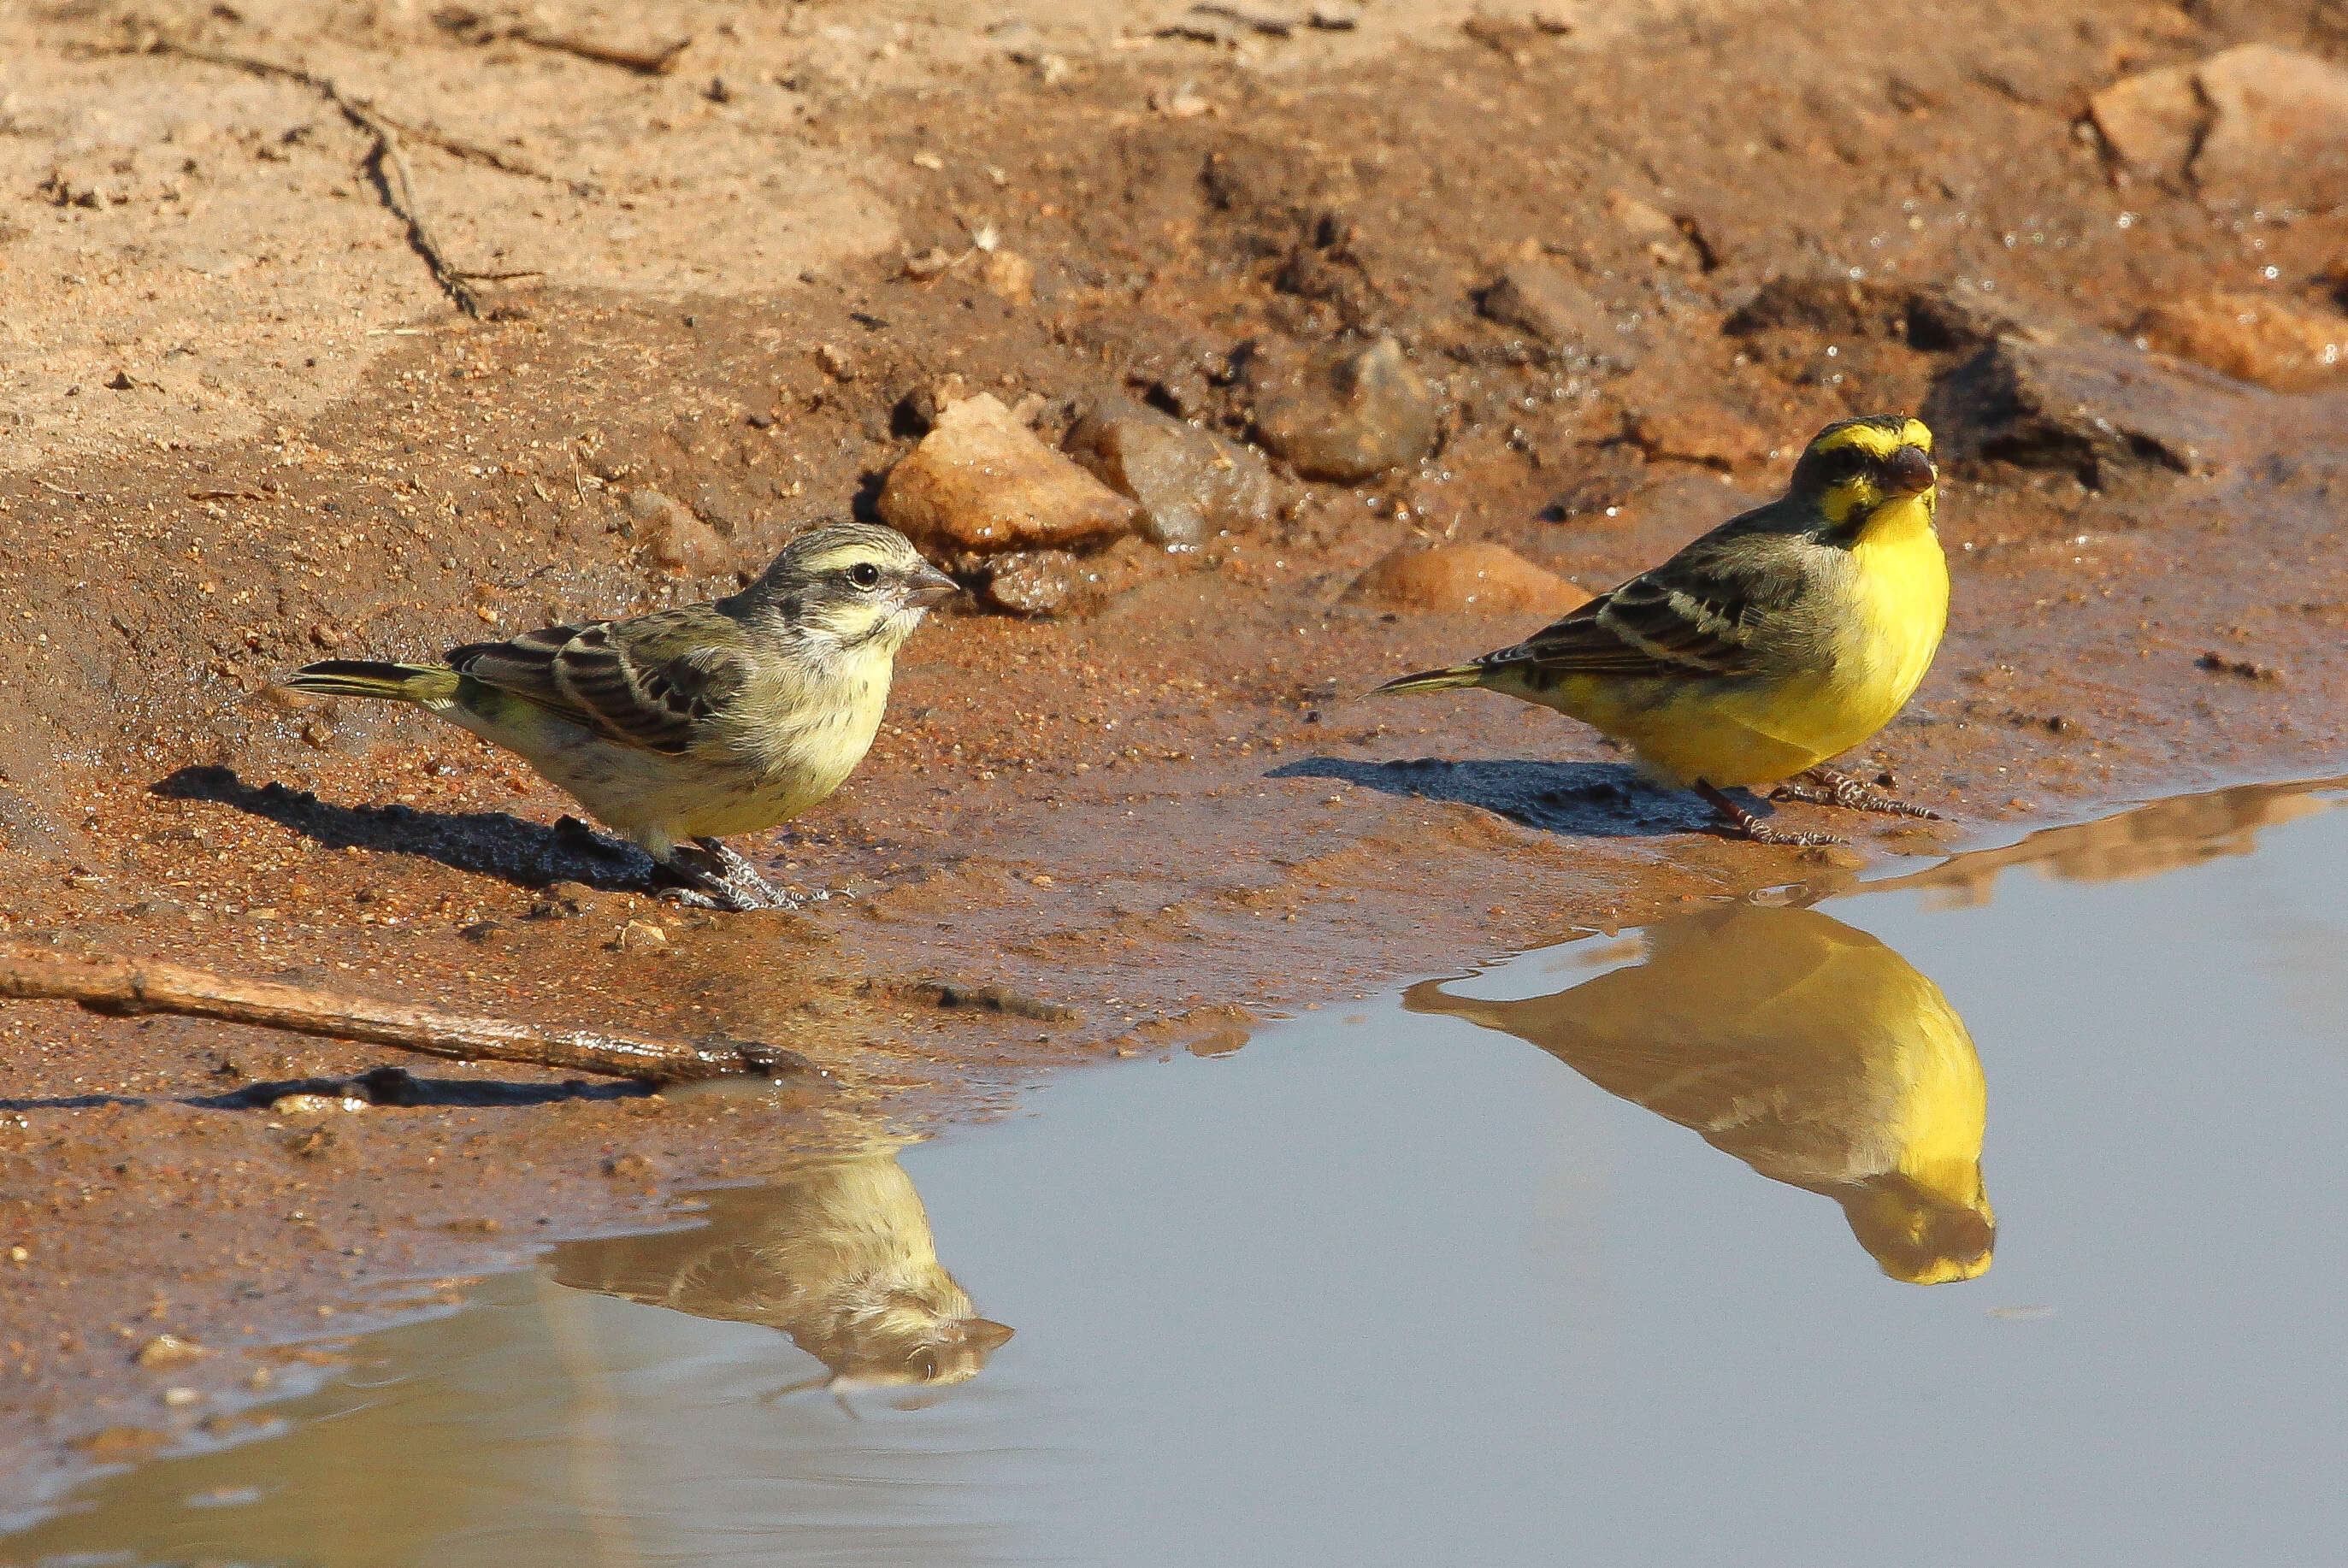 Image of finches